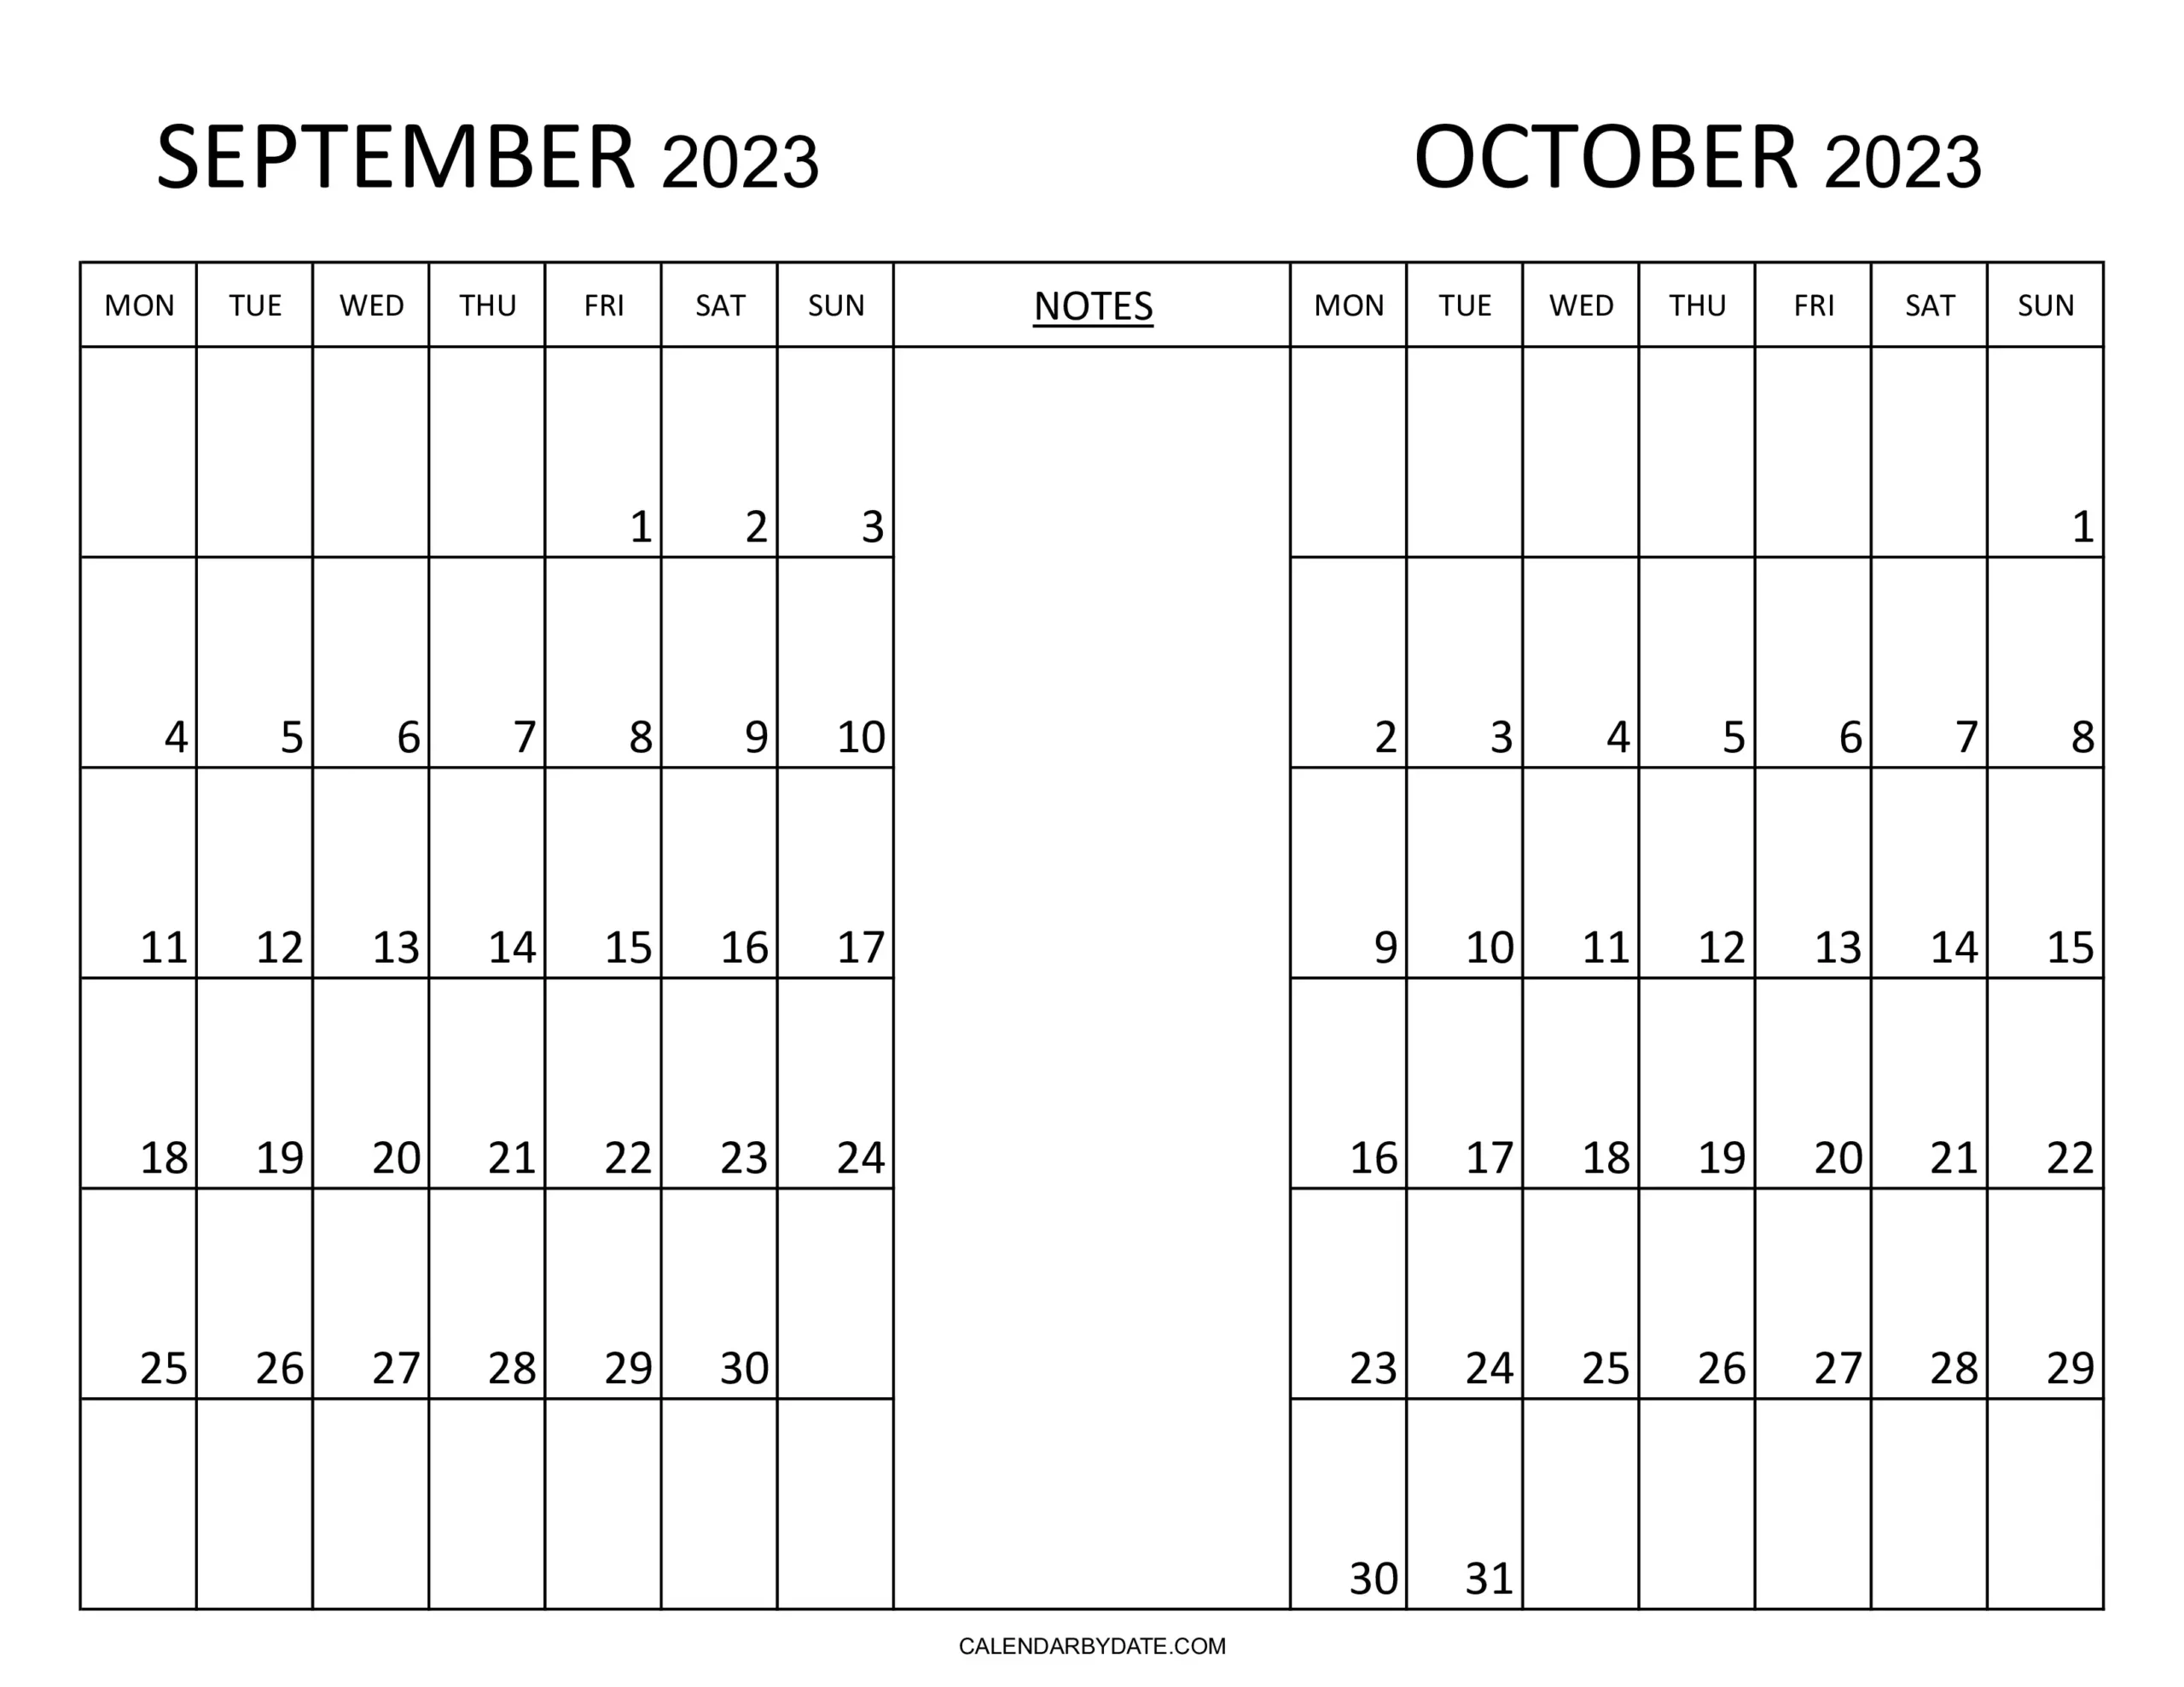 With the September October 2023 Calendar with Notes, you can stay organized, never forget important dates. Download these printable templates online.